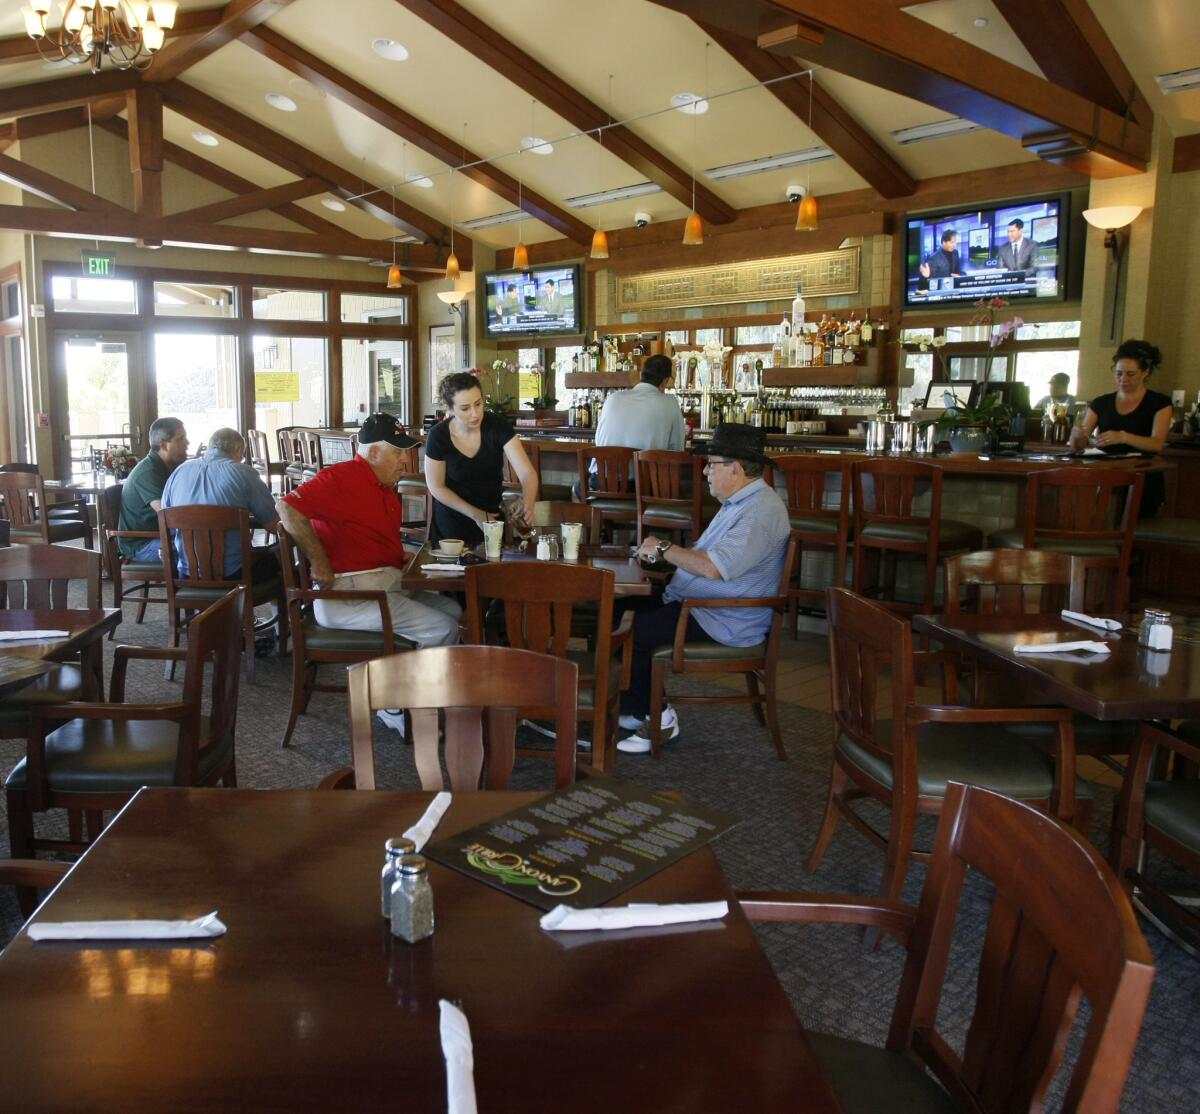 Canyon Grille, the new eatery at the DeBell at DeBell Golf Club in Burbank, opened to diners on Monday. The eatery is pictured on Friday, January 17, 2014. (Raul Roa/Staff Photographer)